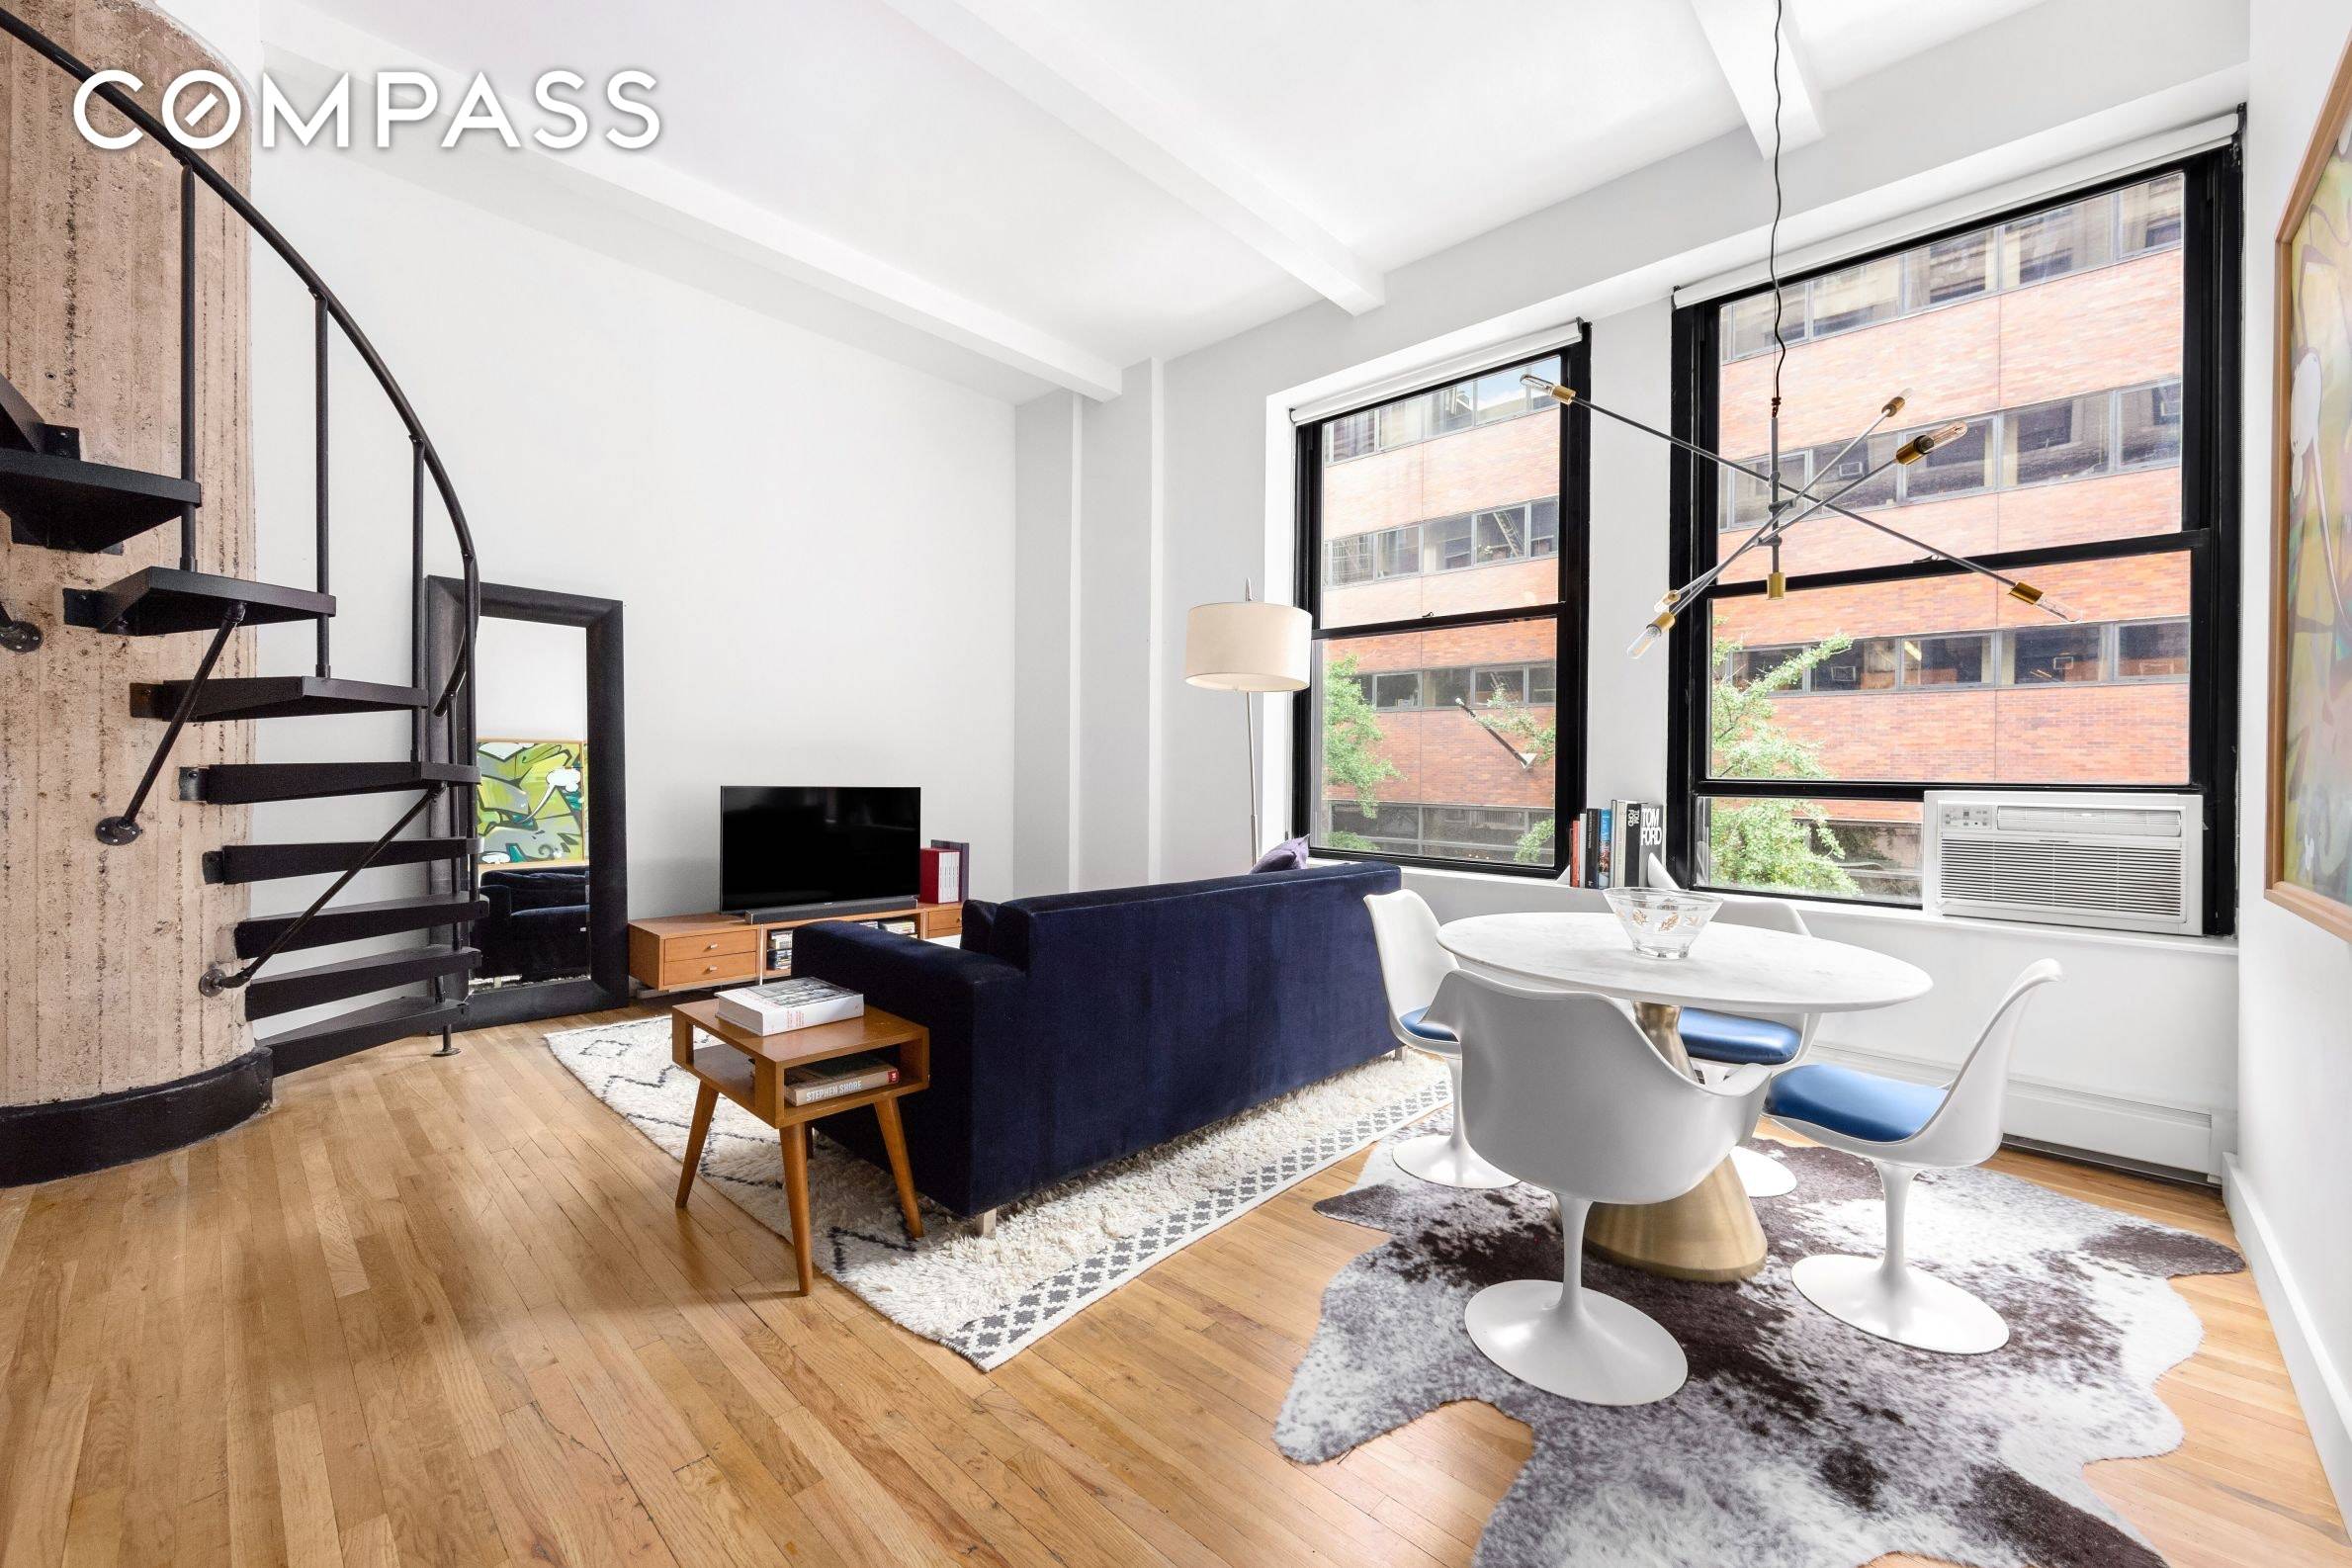 This eclectic loft style studio in one of Greenwich Village s most popular buildings is a rare find.